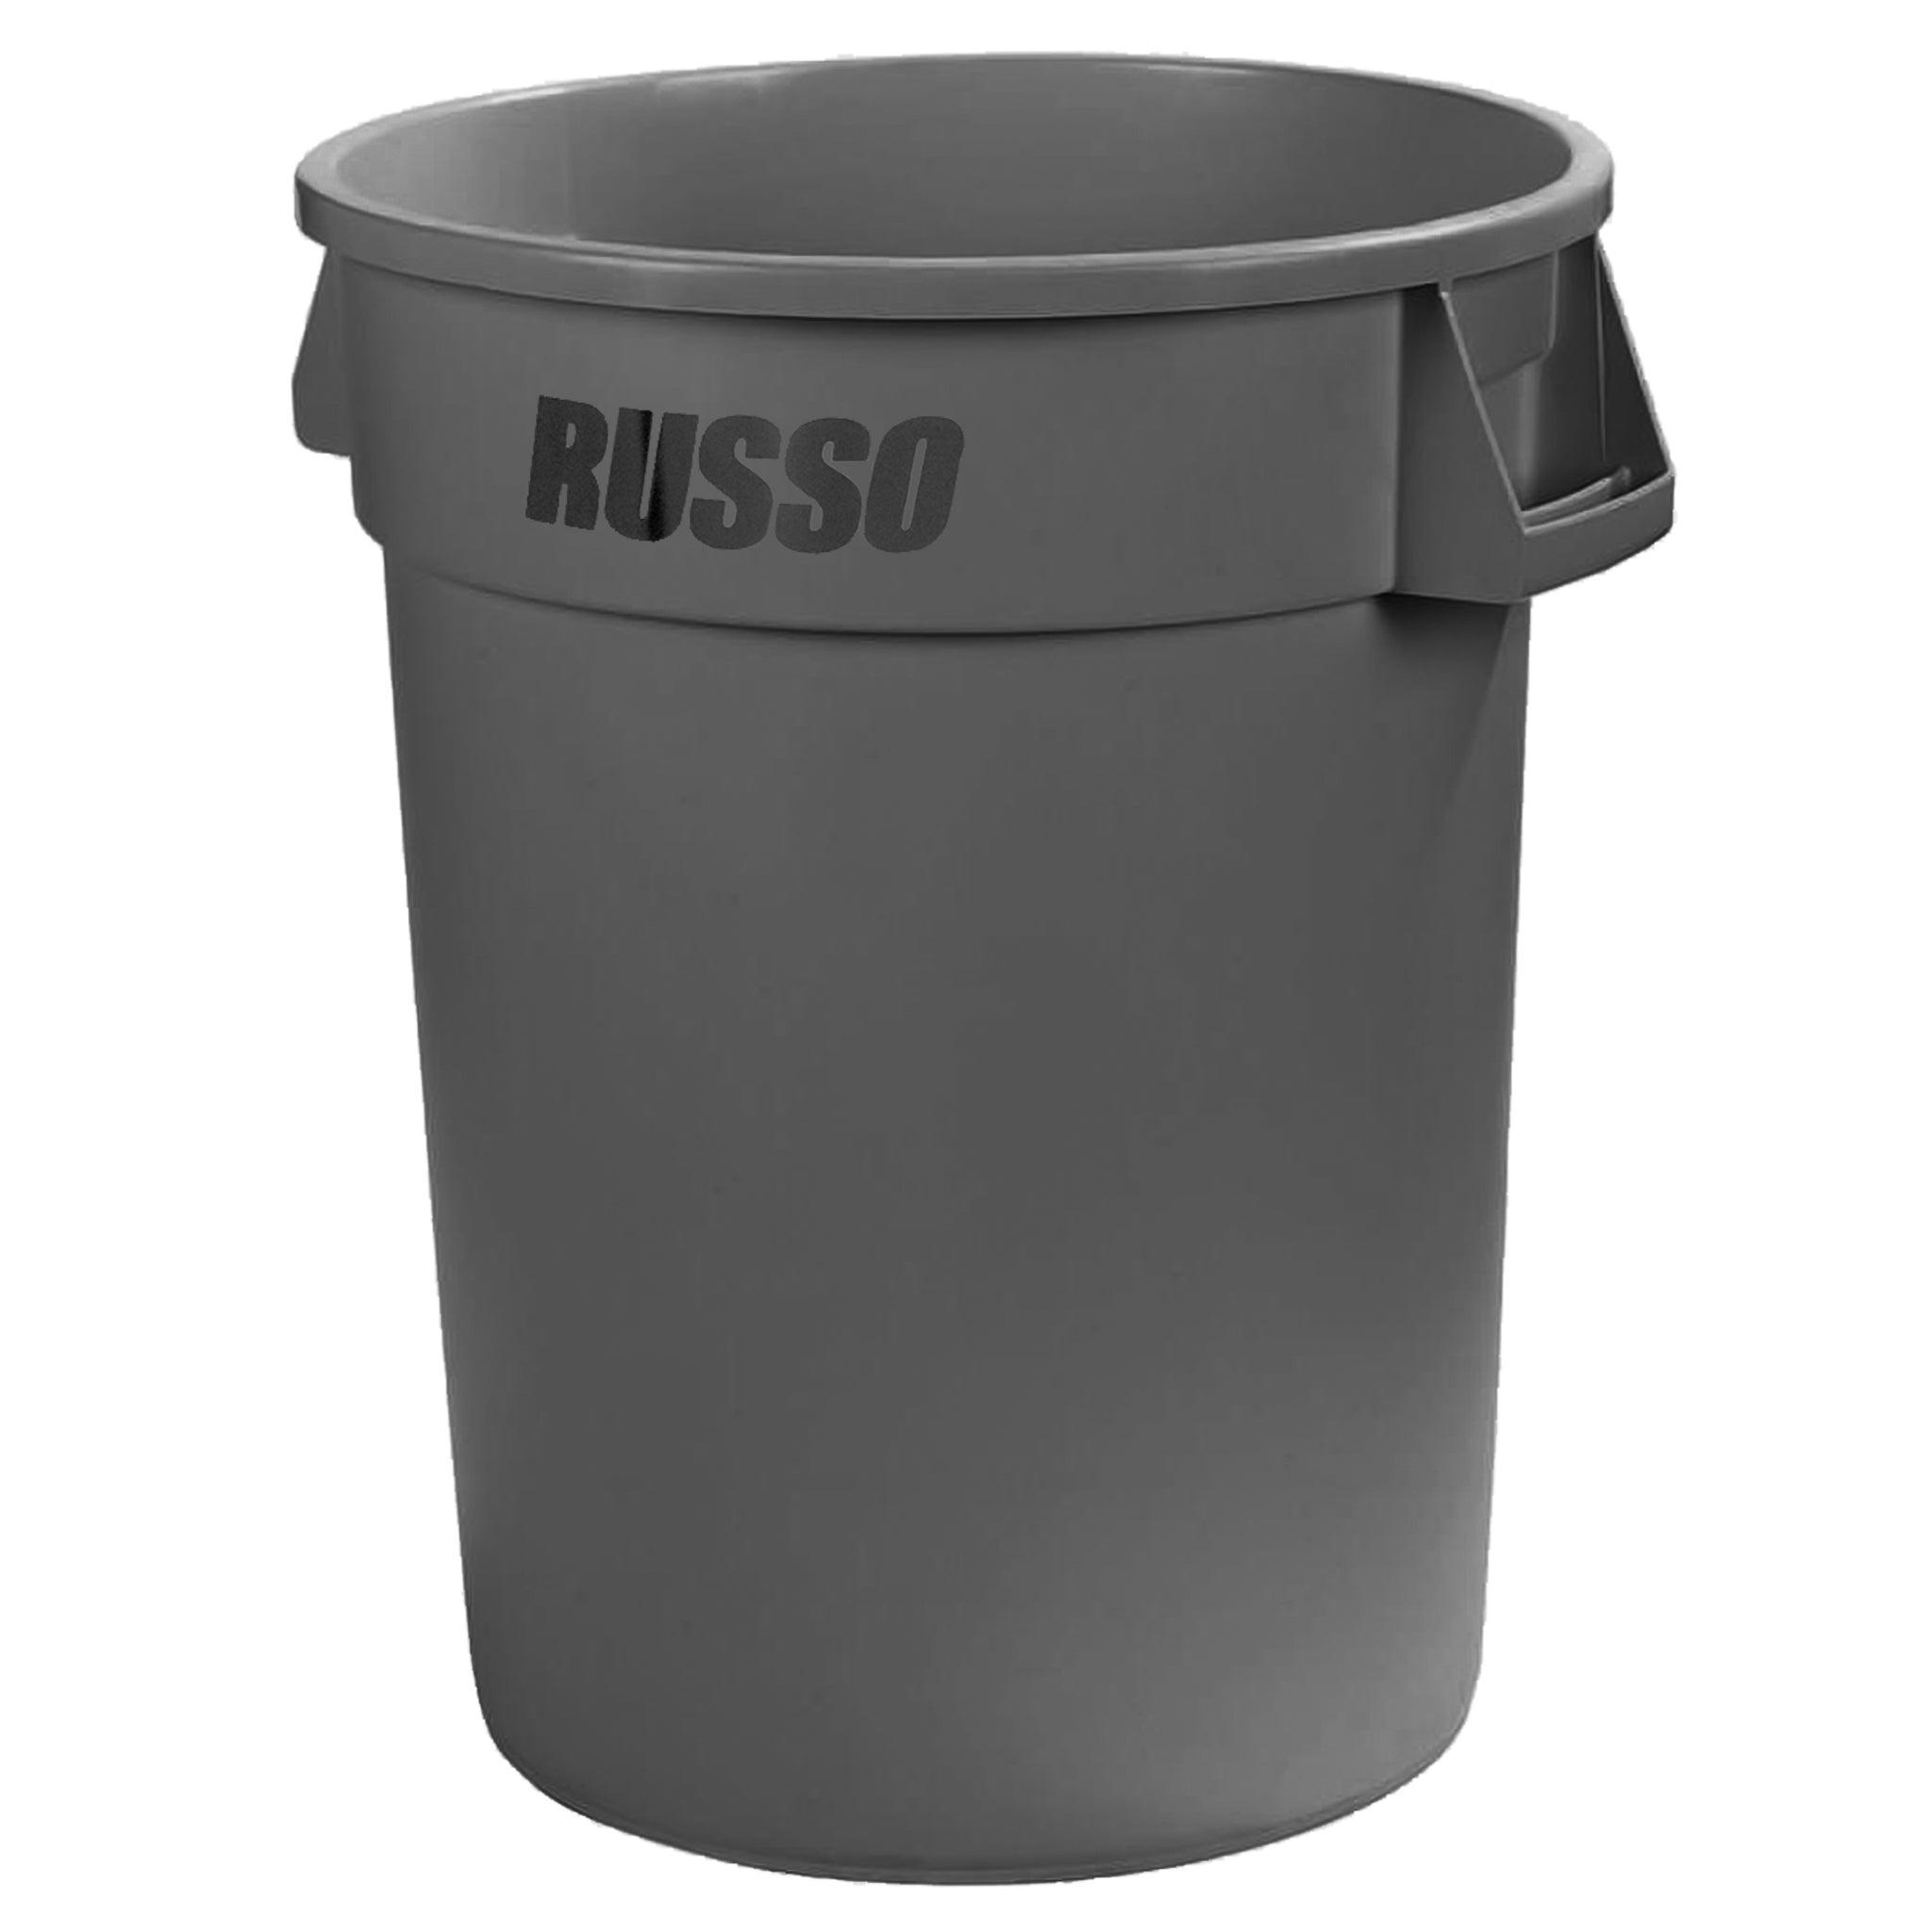 RUSSO Glow Garbage Can 44 Gallon – Gray